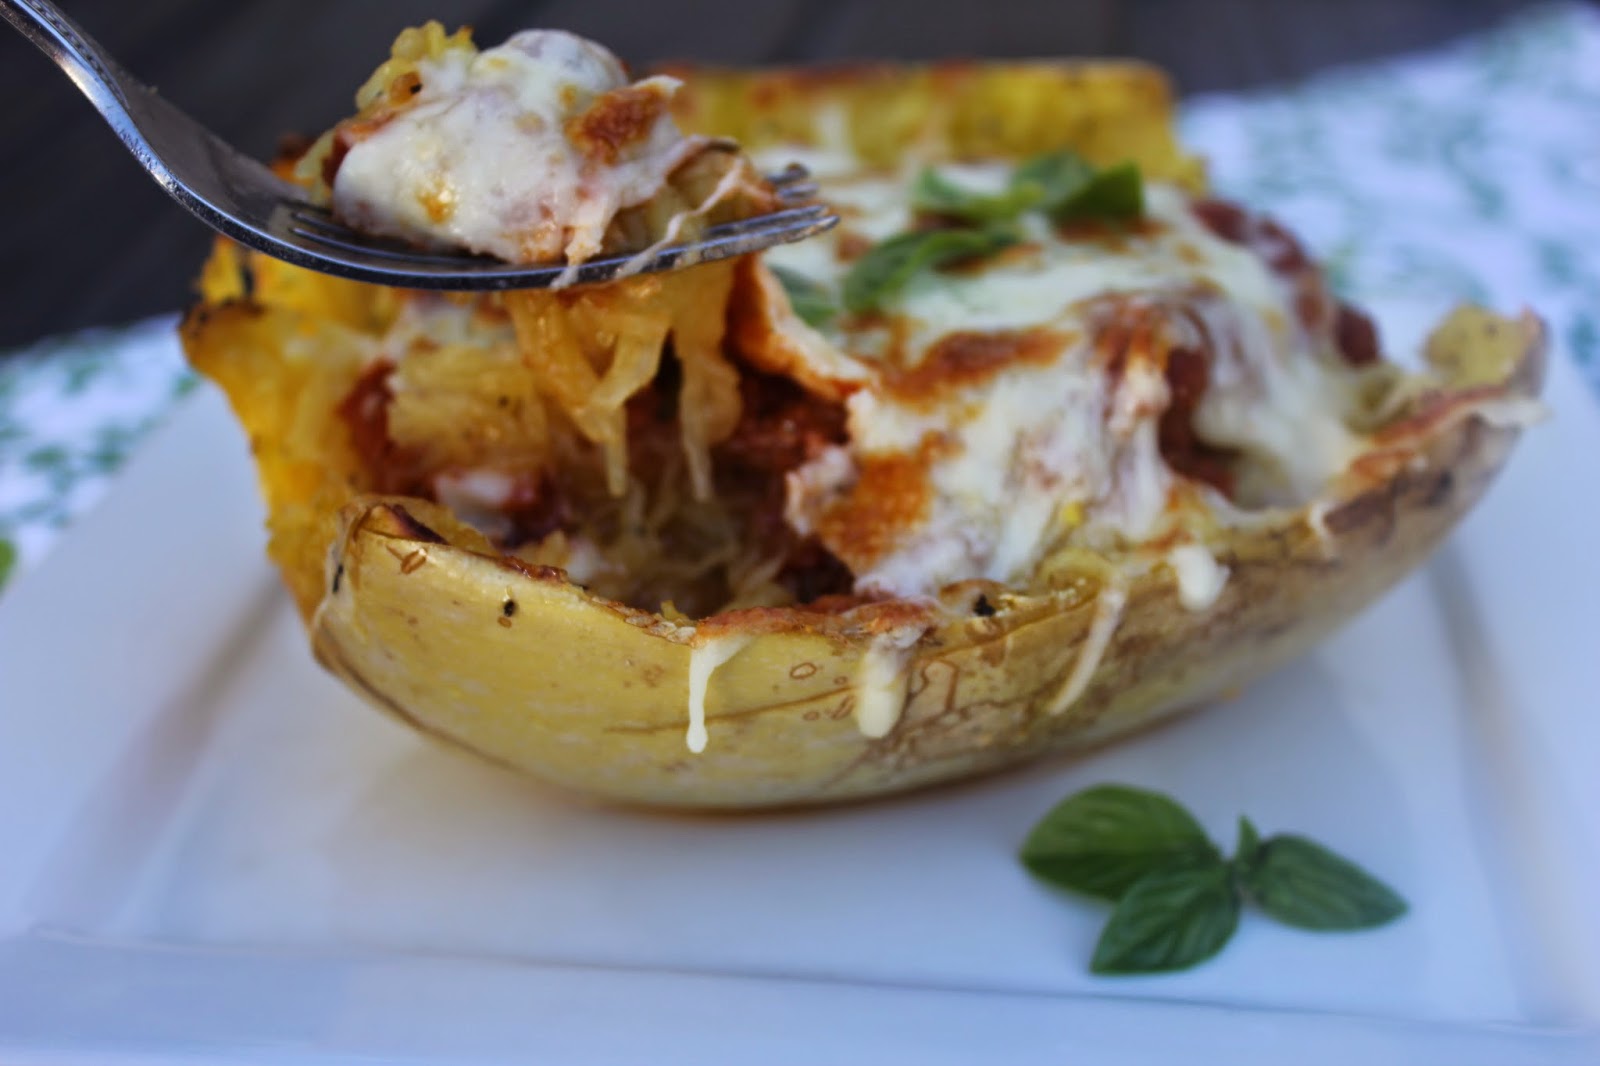 Recipe: Vegetable, Recipe: Side Dishes, Garden Recipes, Recipe: Healthy, Spaghetti Squash Bowls, Perfect way to cook Spaghetti Squash, Deals to Meals